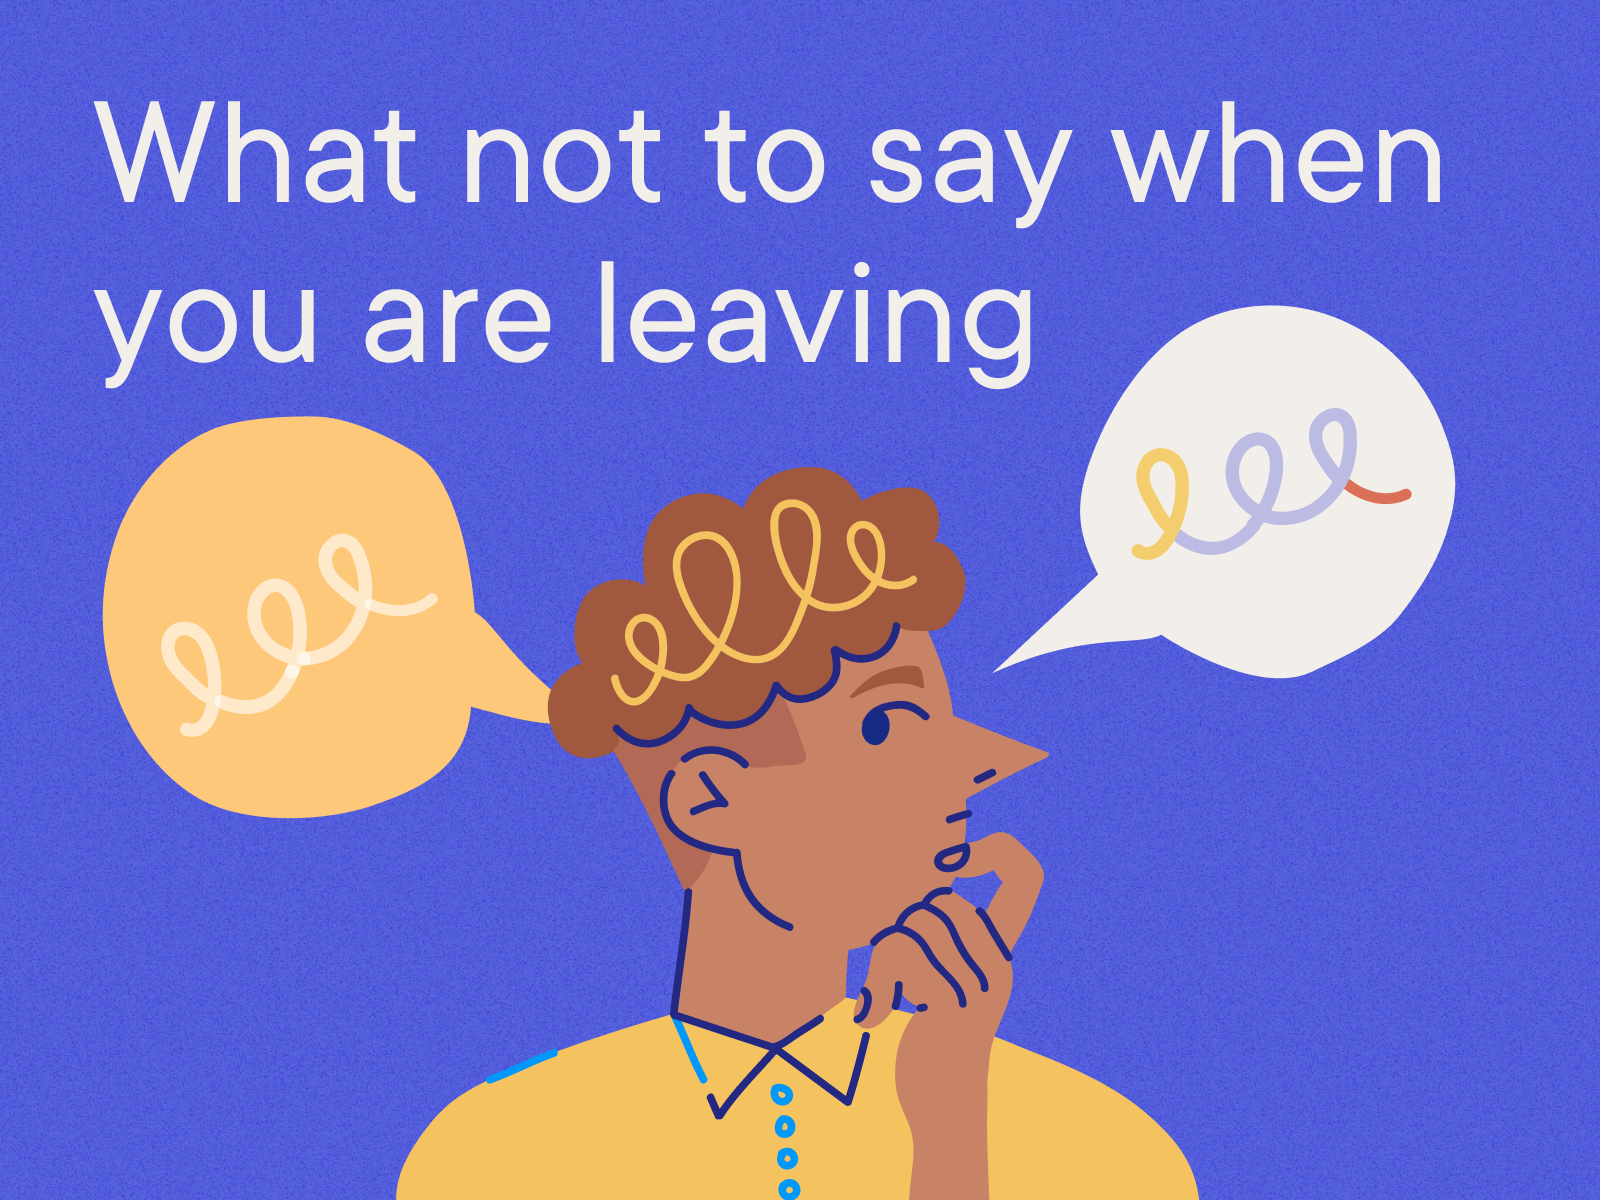 Blog - Why did you leave your last job - What not to say when you are answering this question